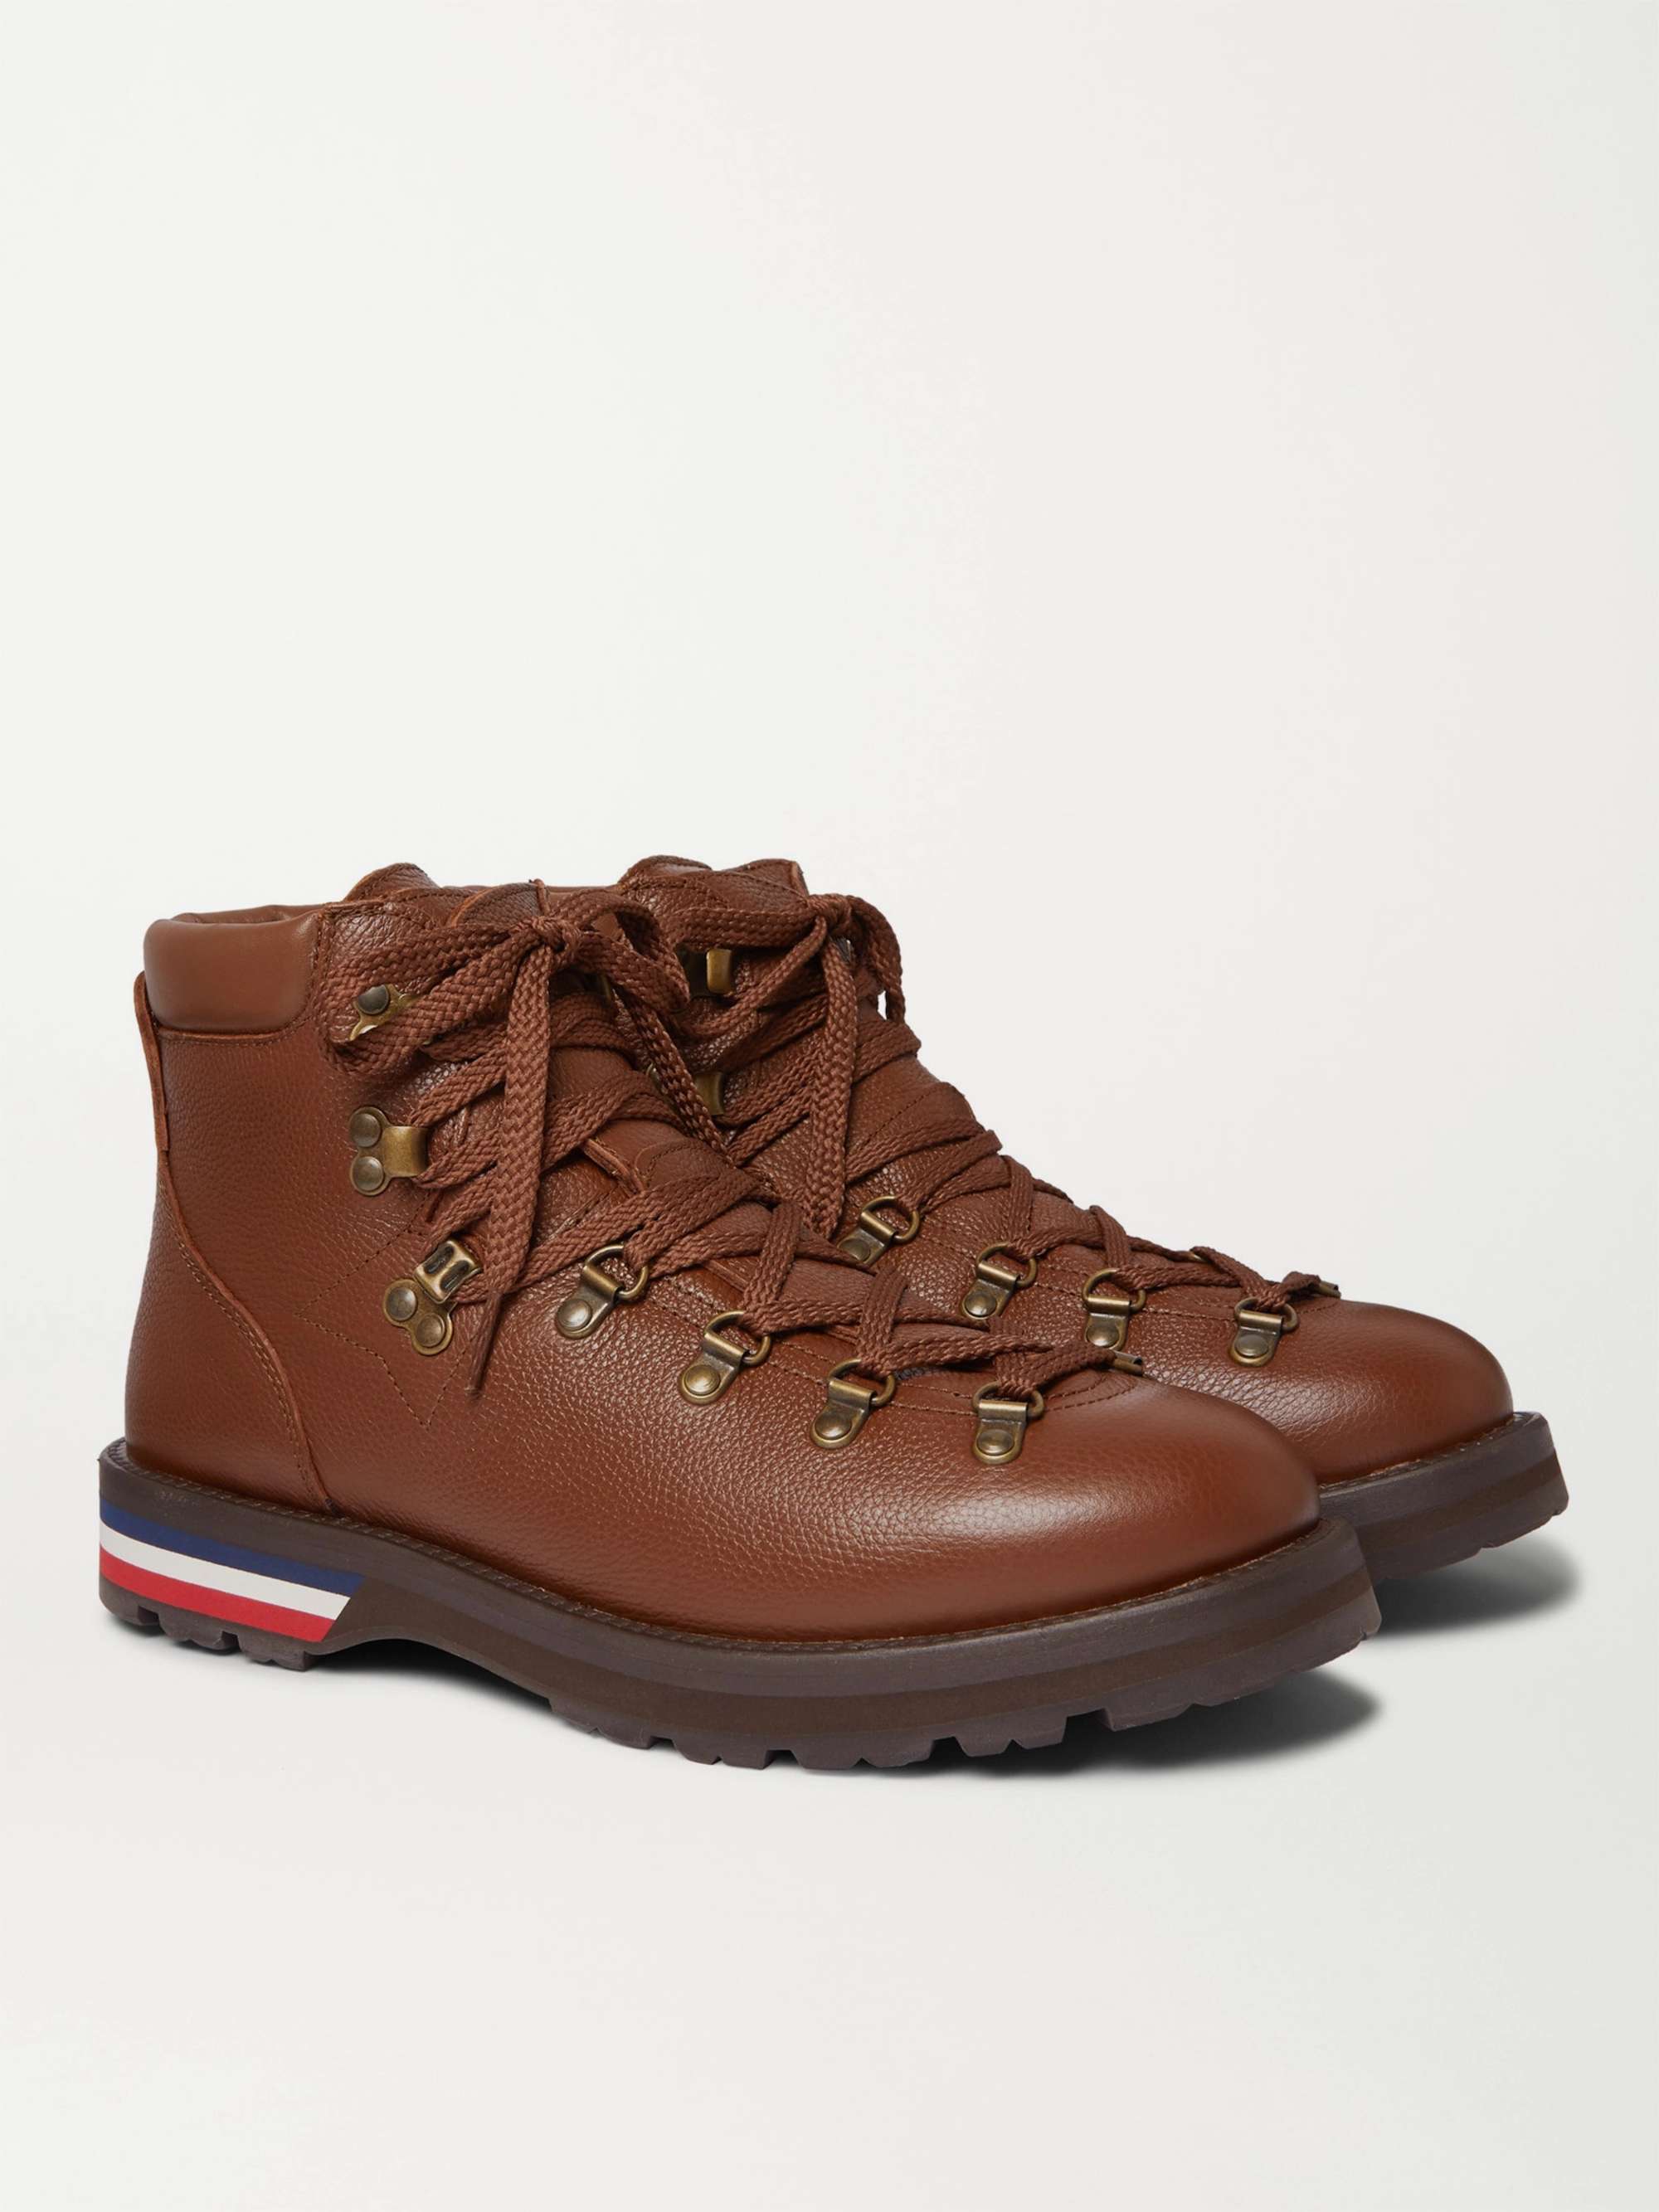 MONCLER Striped Full-Grain Leather Boots